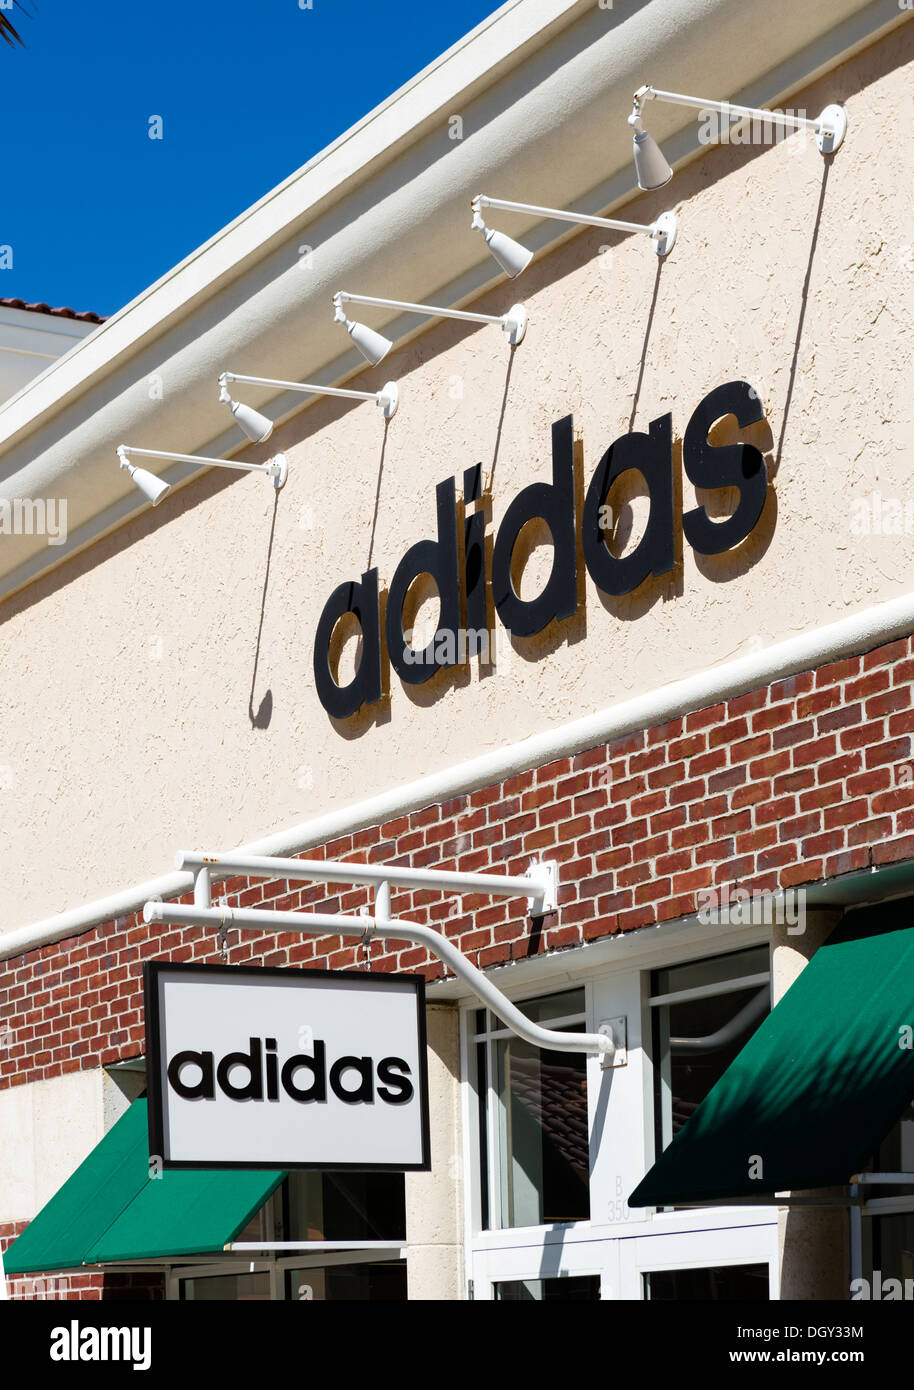 adidas at the outlets